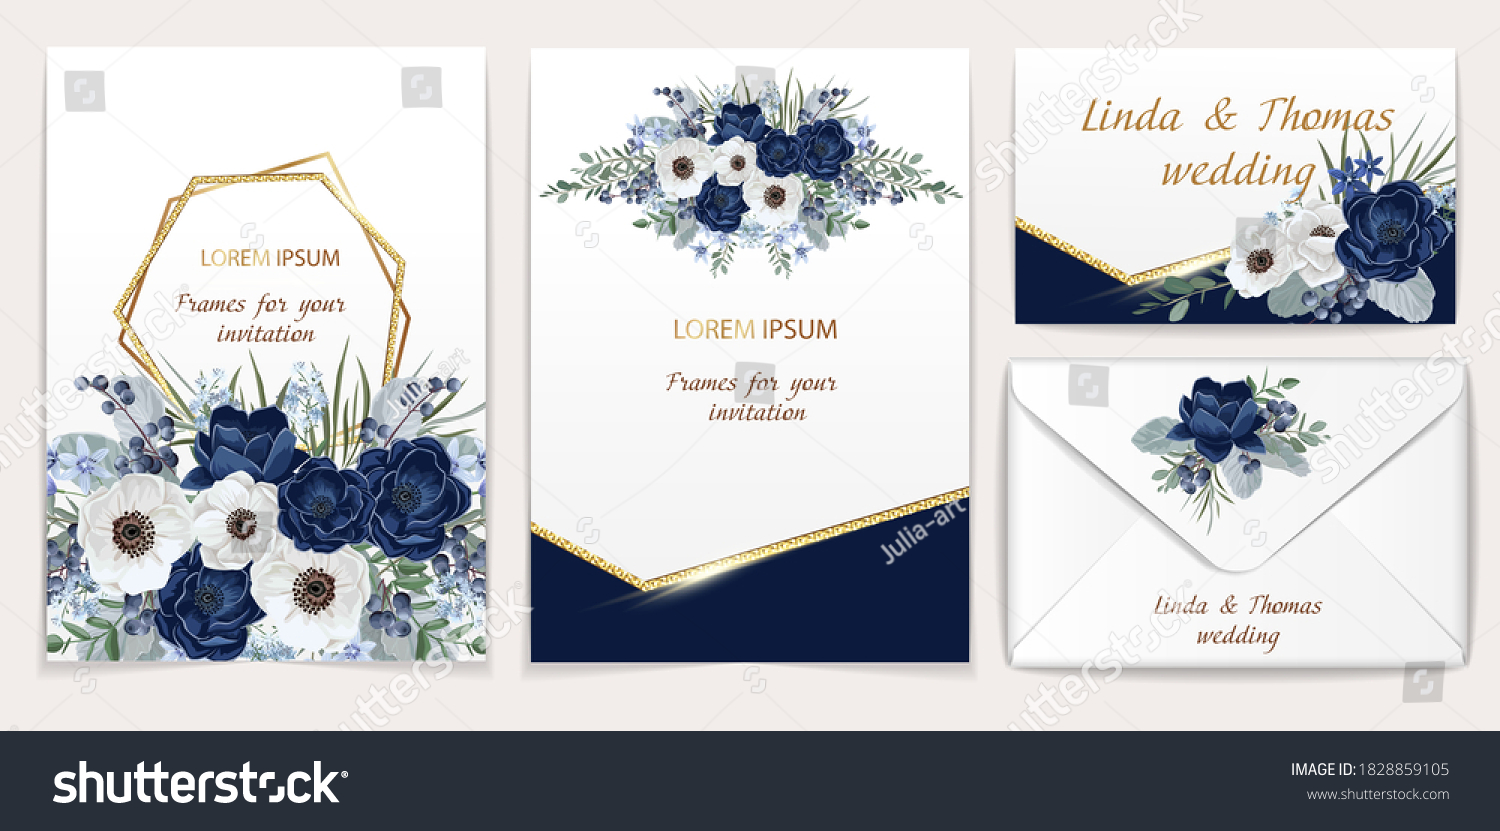 SVG of Invitation or greeting card and business card with gold geometrical frames, transparent light effects and wedding flowers. Golden brilliants elements and flowers isolated on background svg